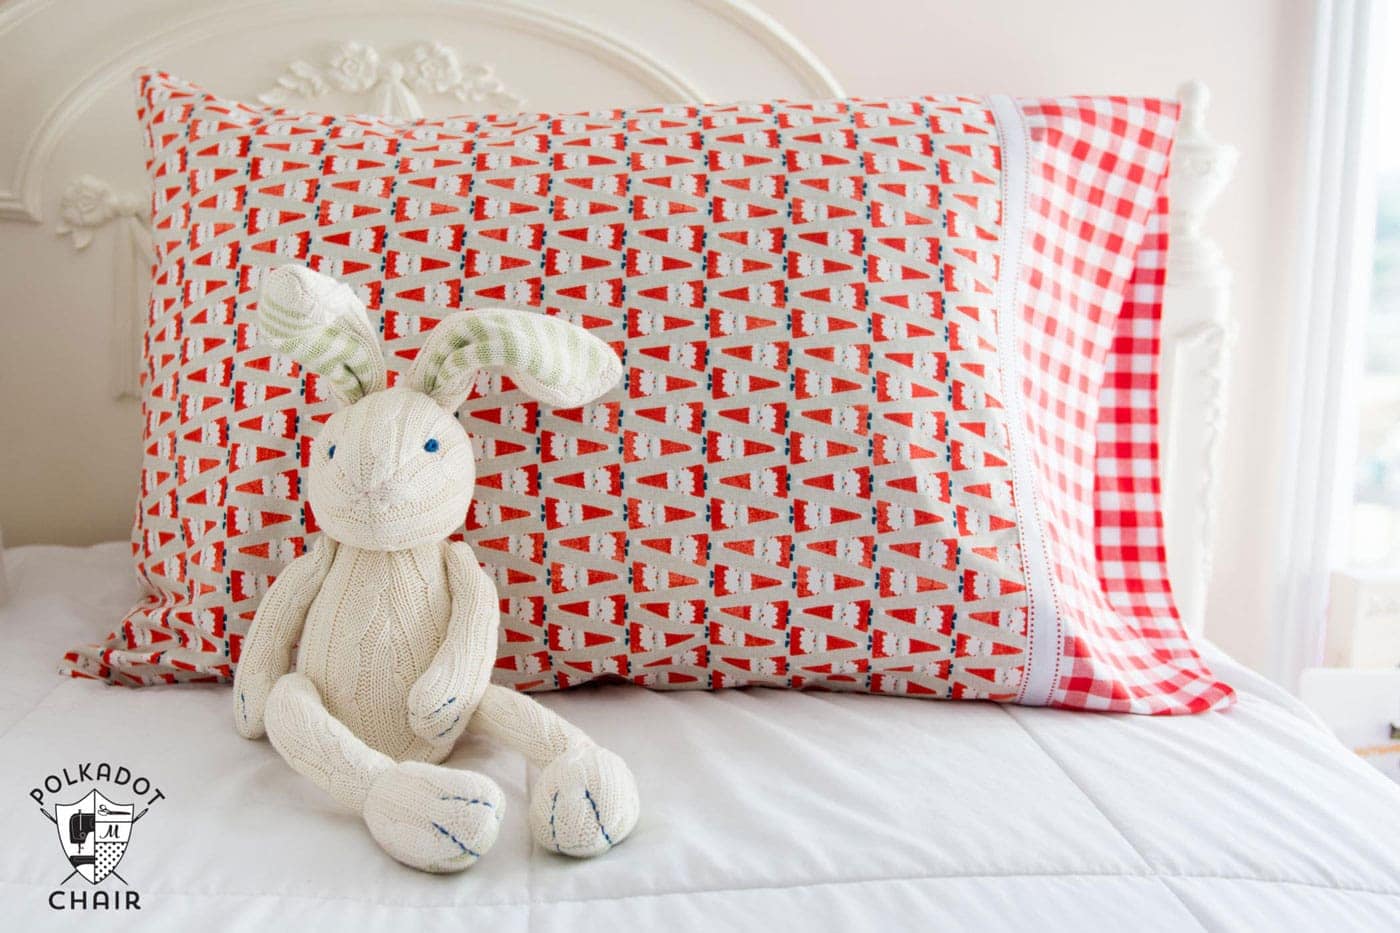 bunny and pillowcase on bed